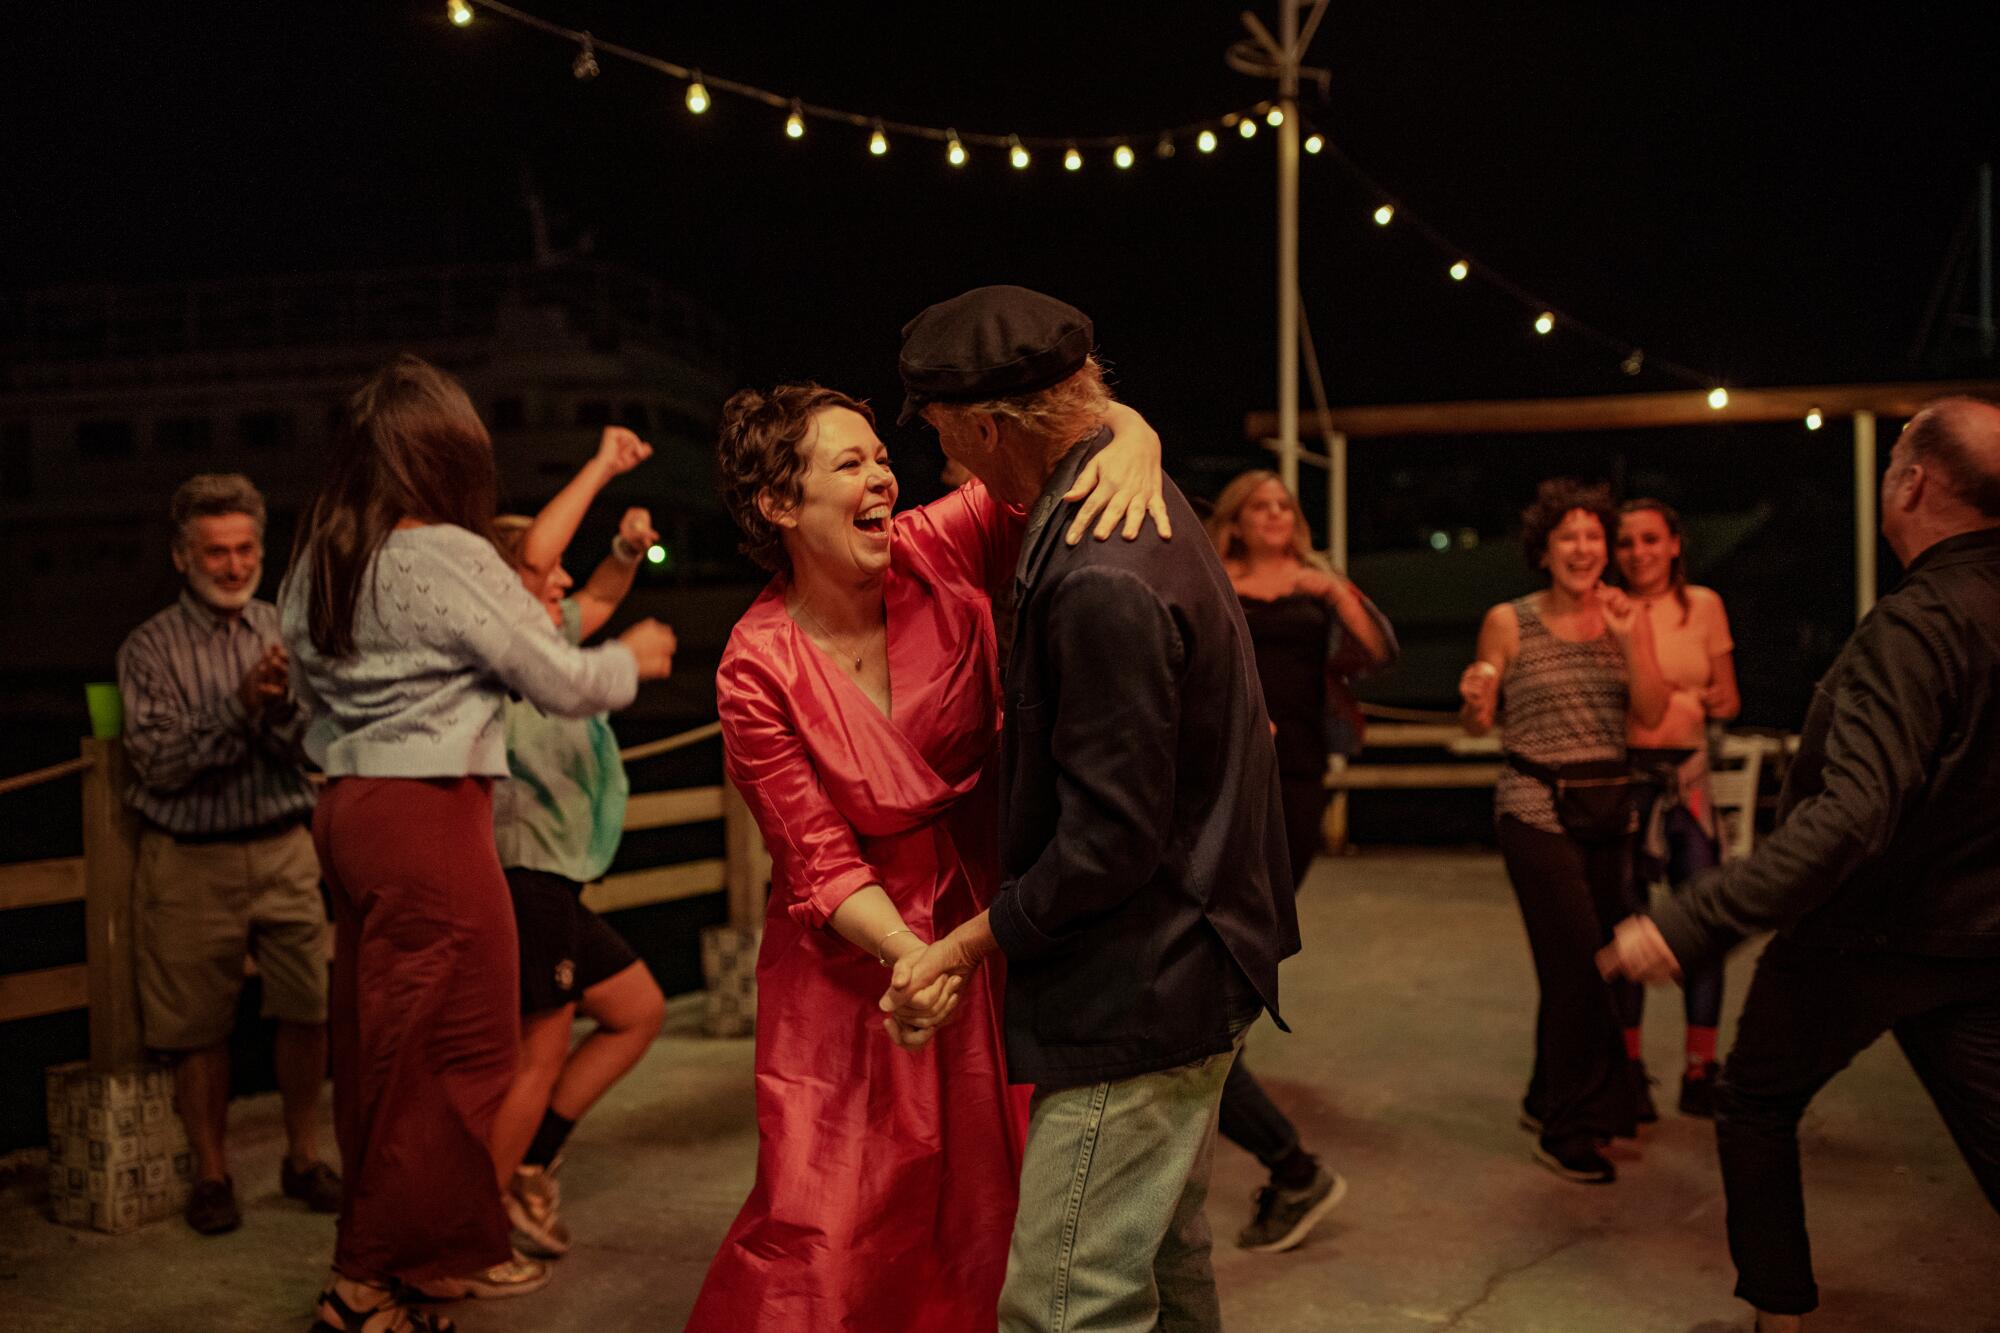 Olivia Colman and Ed Harris dance in a scene from "The Lost Daughter."